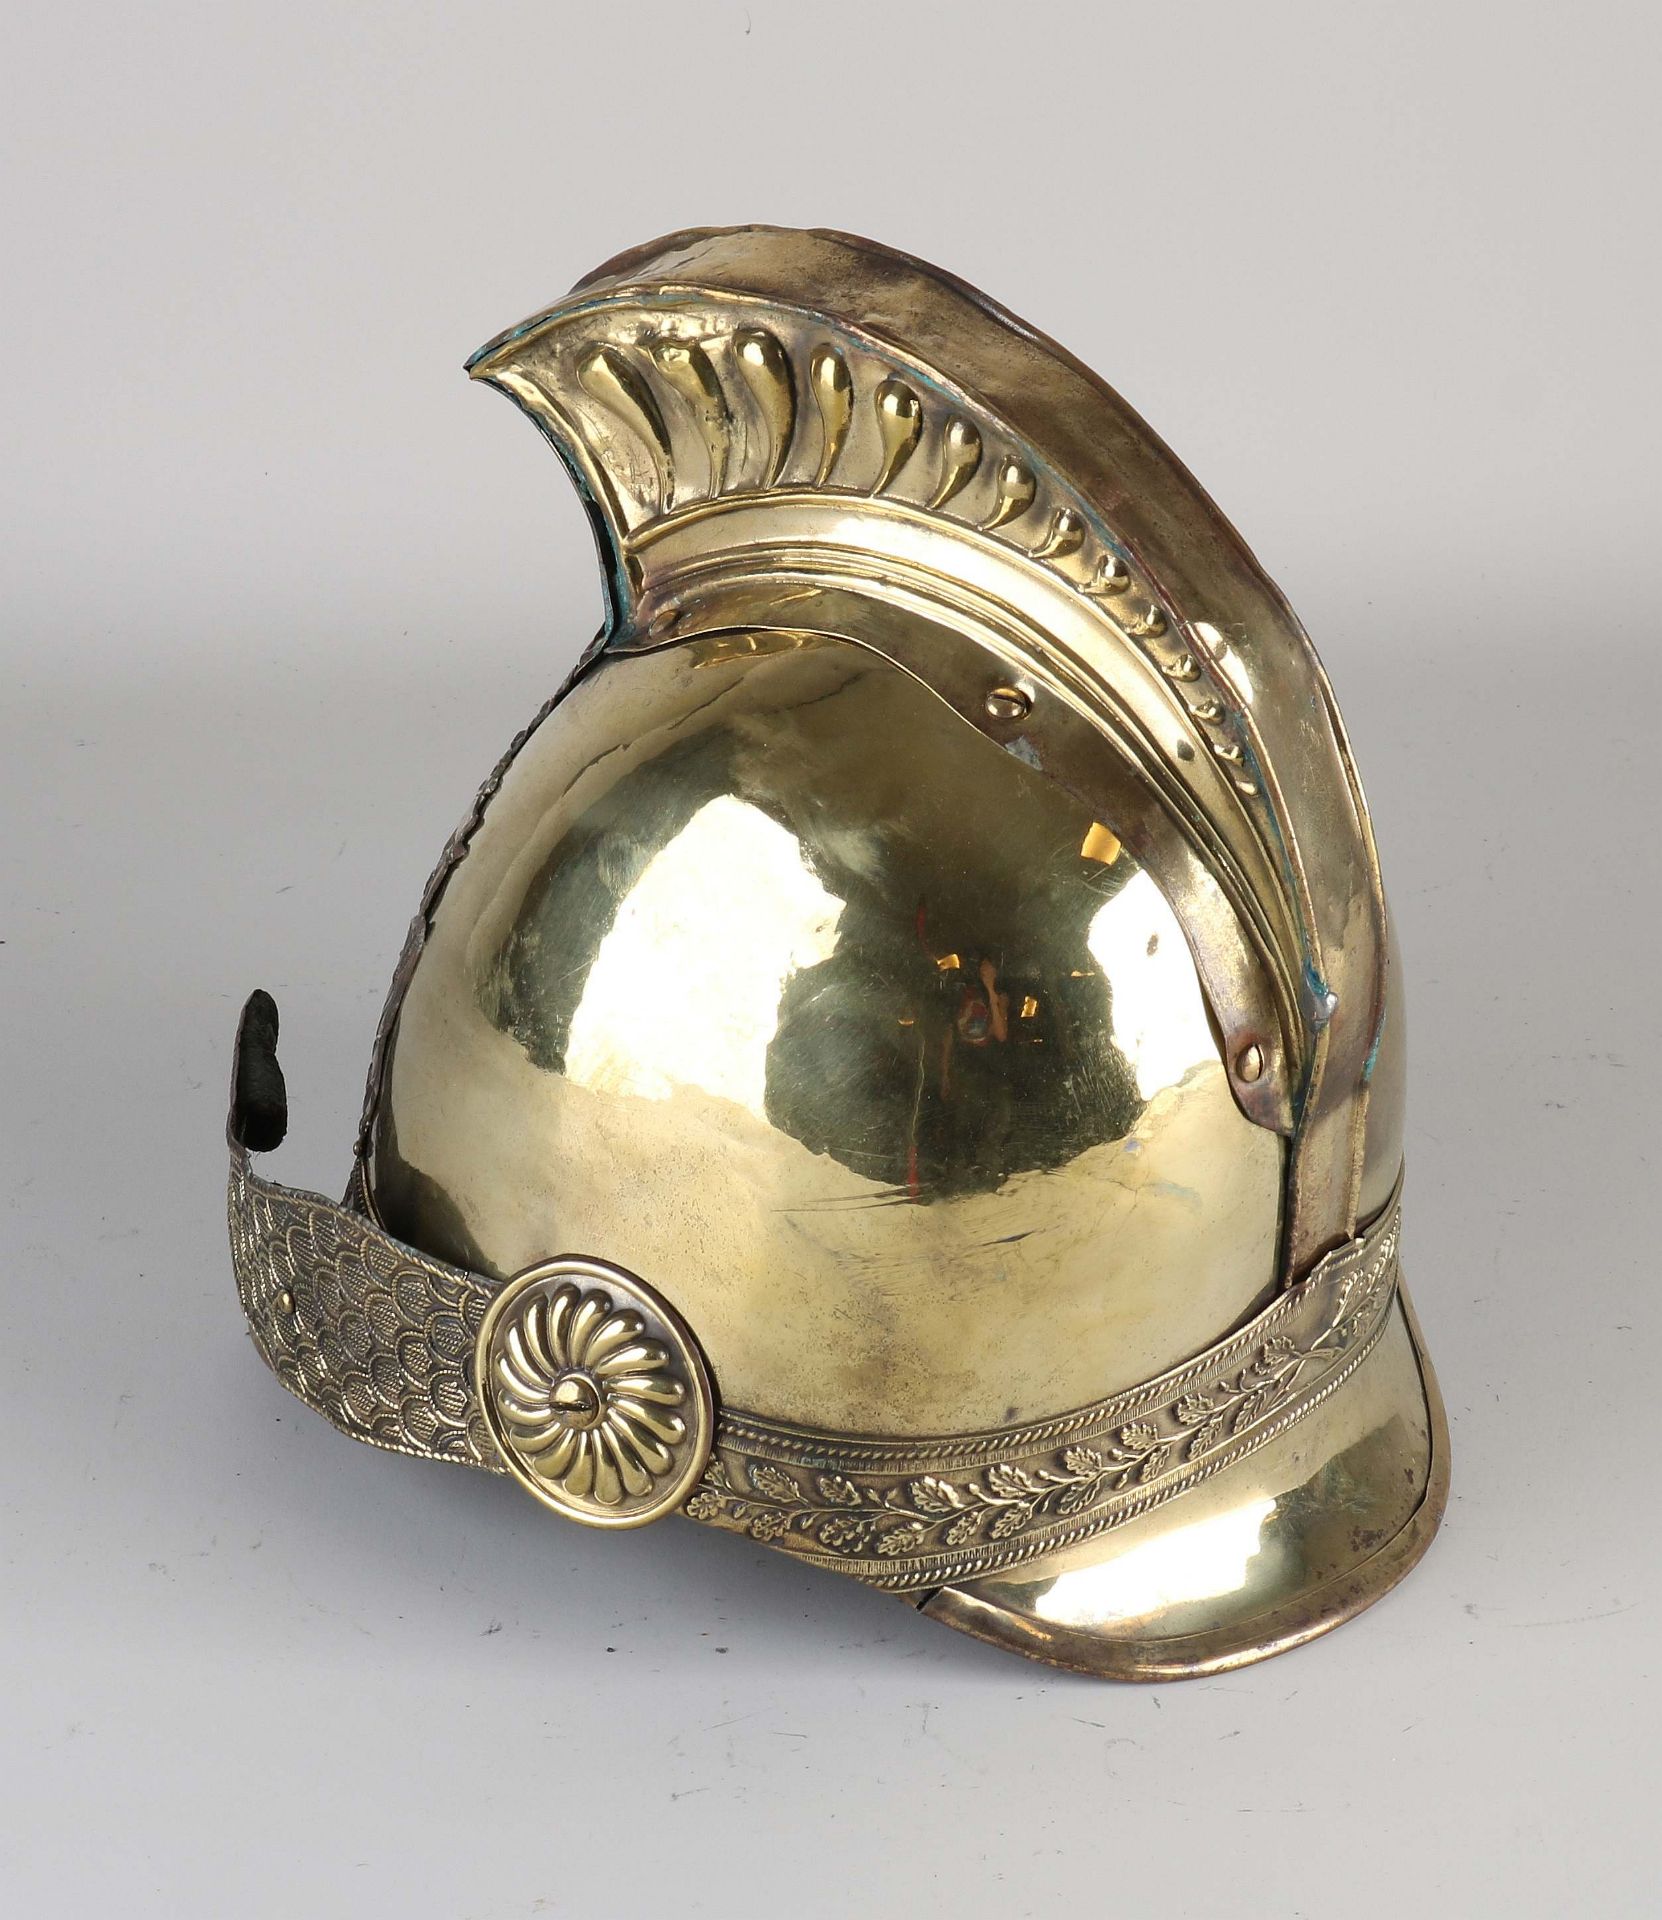 Antique French fire helmet - Image 2 of 2